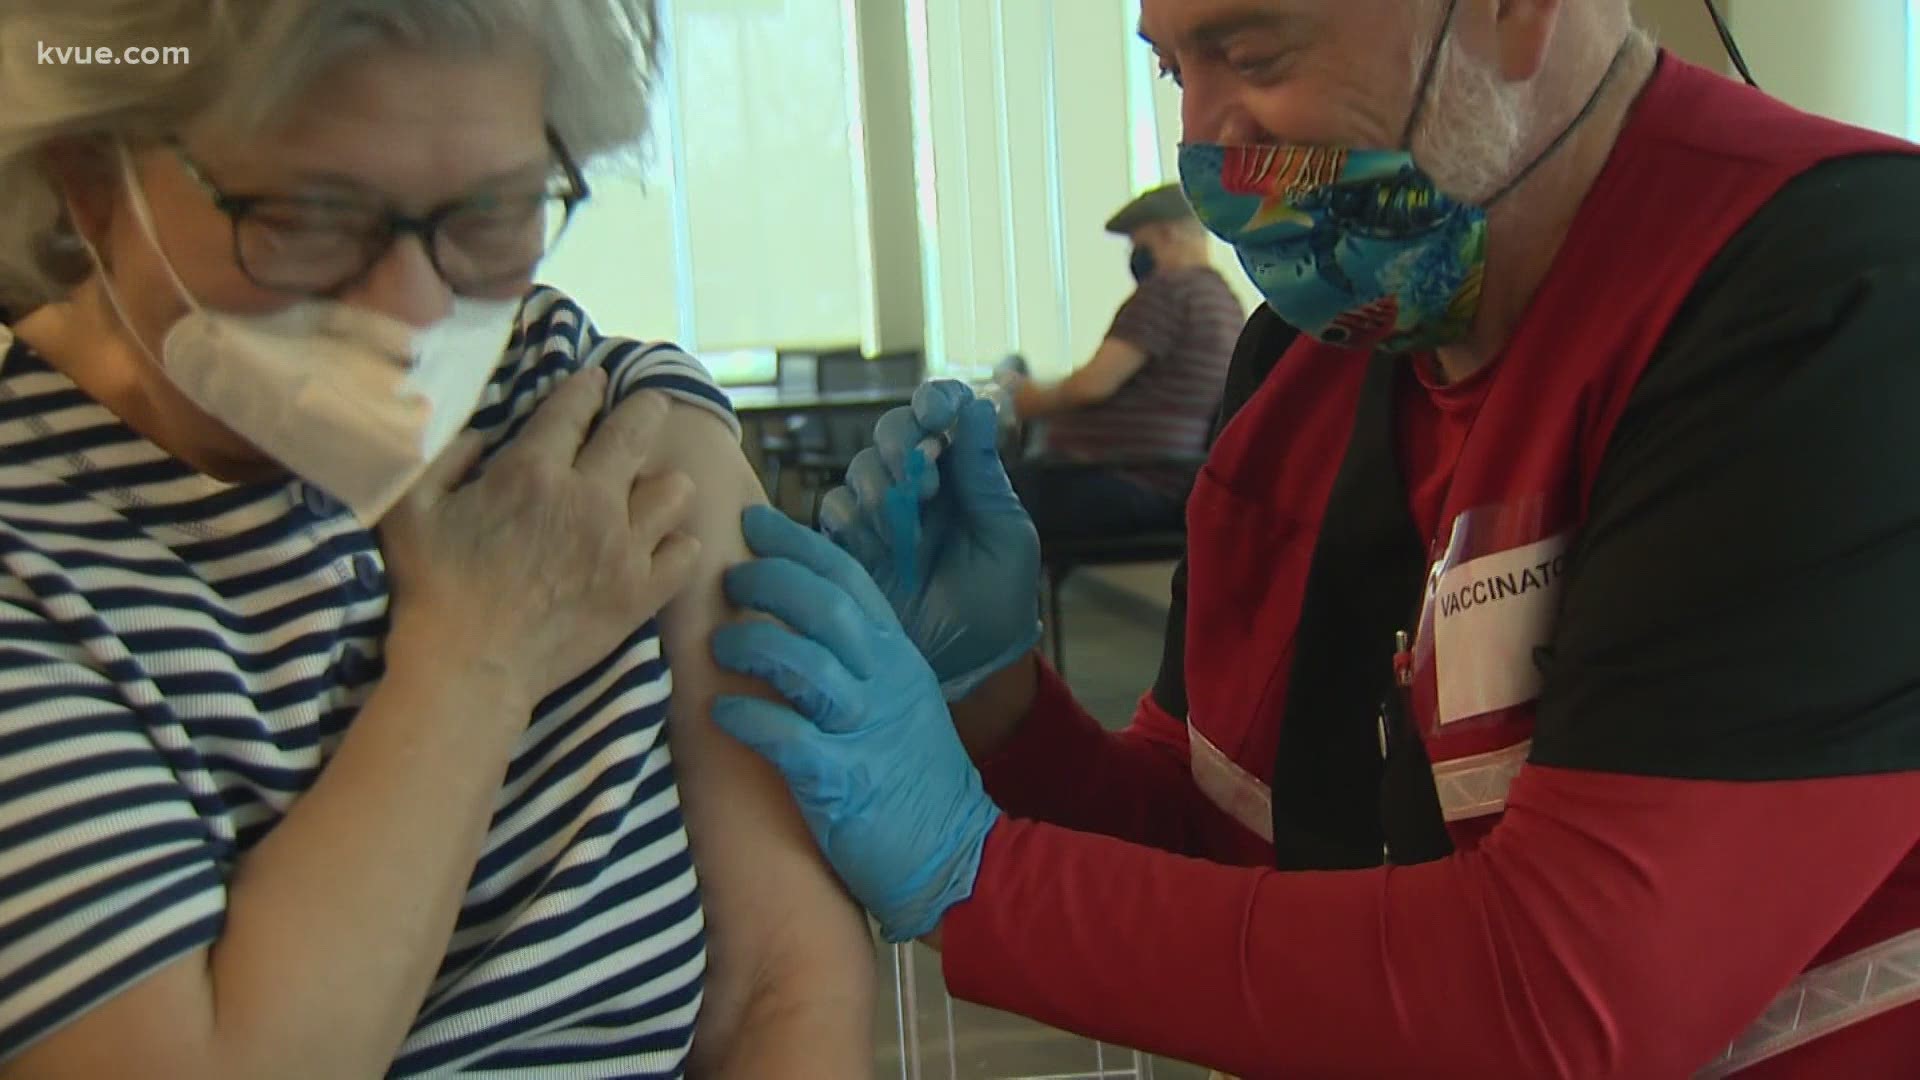 Some Austin ISD teachers are feeling a little safer against COVID-19 after getting their second dose of the vaccine.